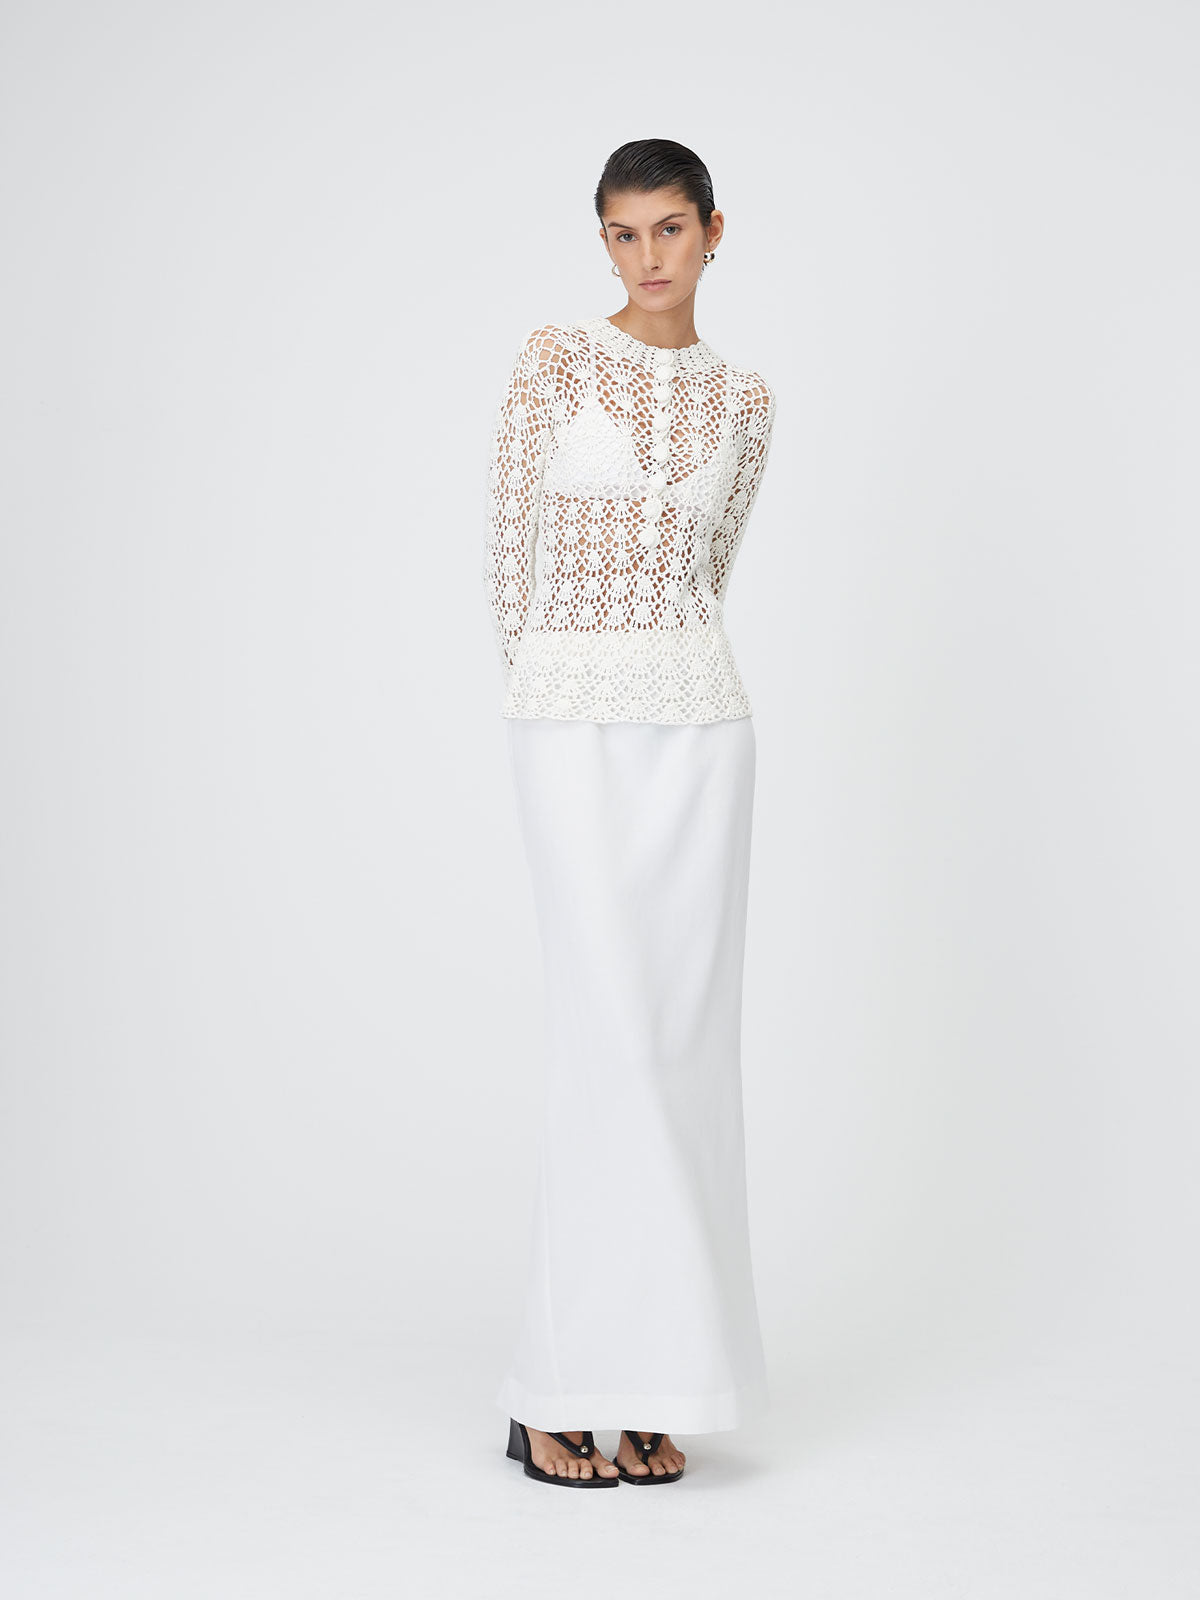 Front view of a model wearing the White 9 Crochet Top with her hands behind her back on top of a white background